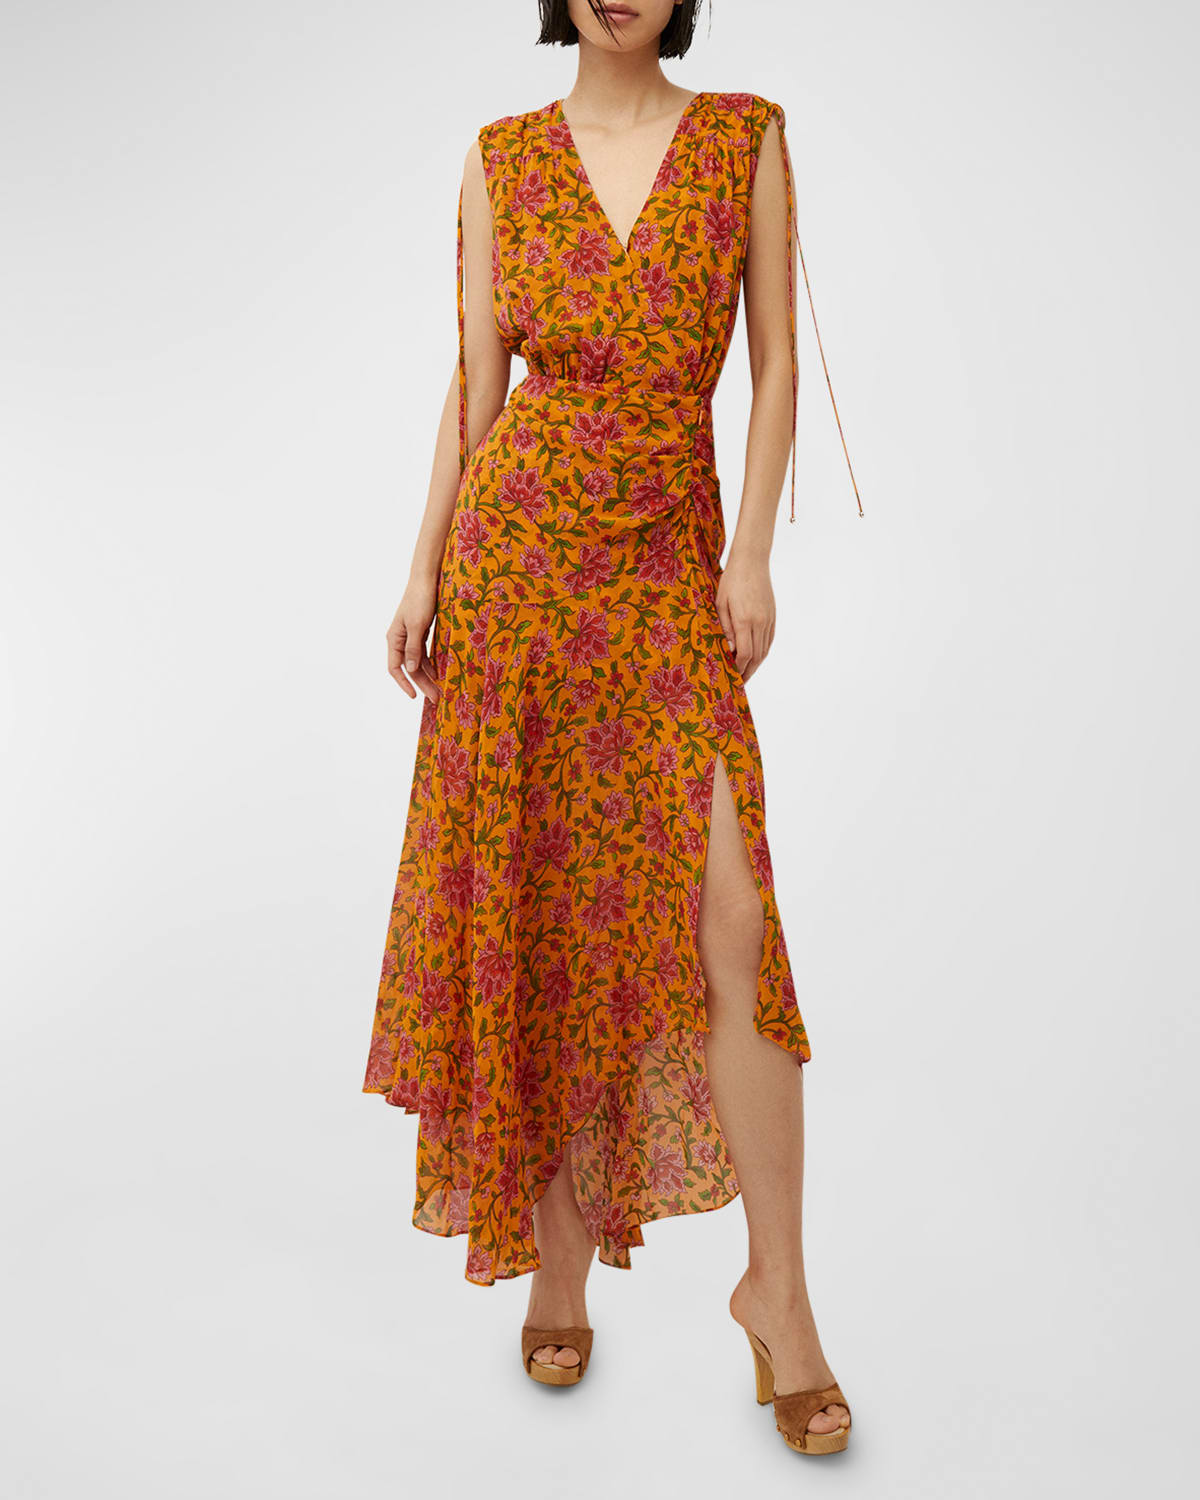 The Floral Dress — MODEDAMOUR